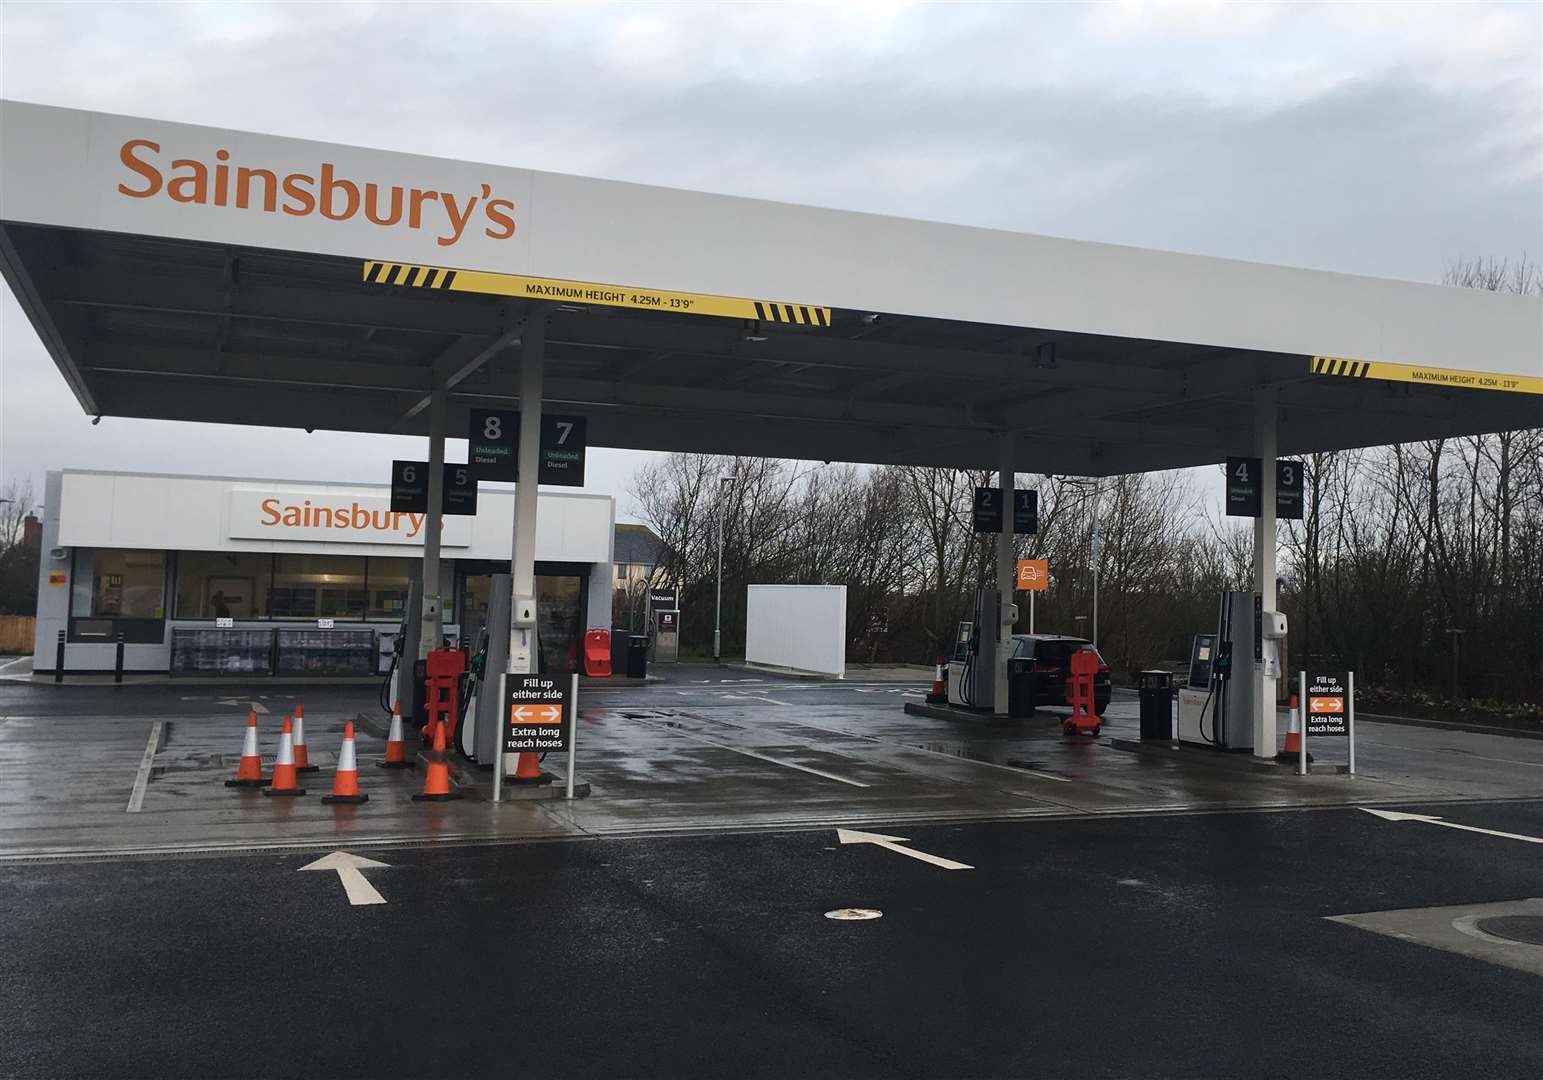 The Sainsbury's petrol station in Broomfield